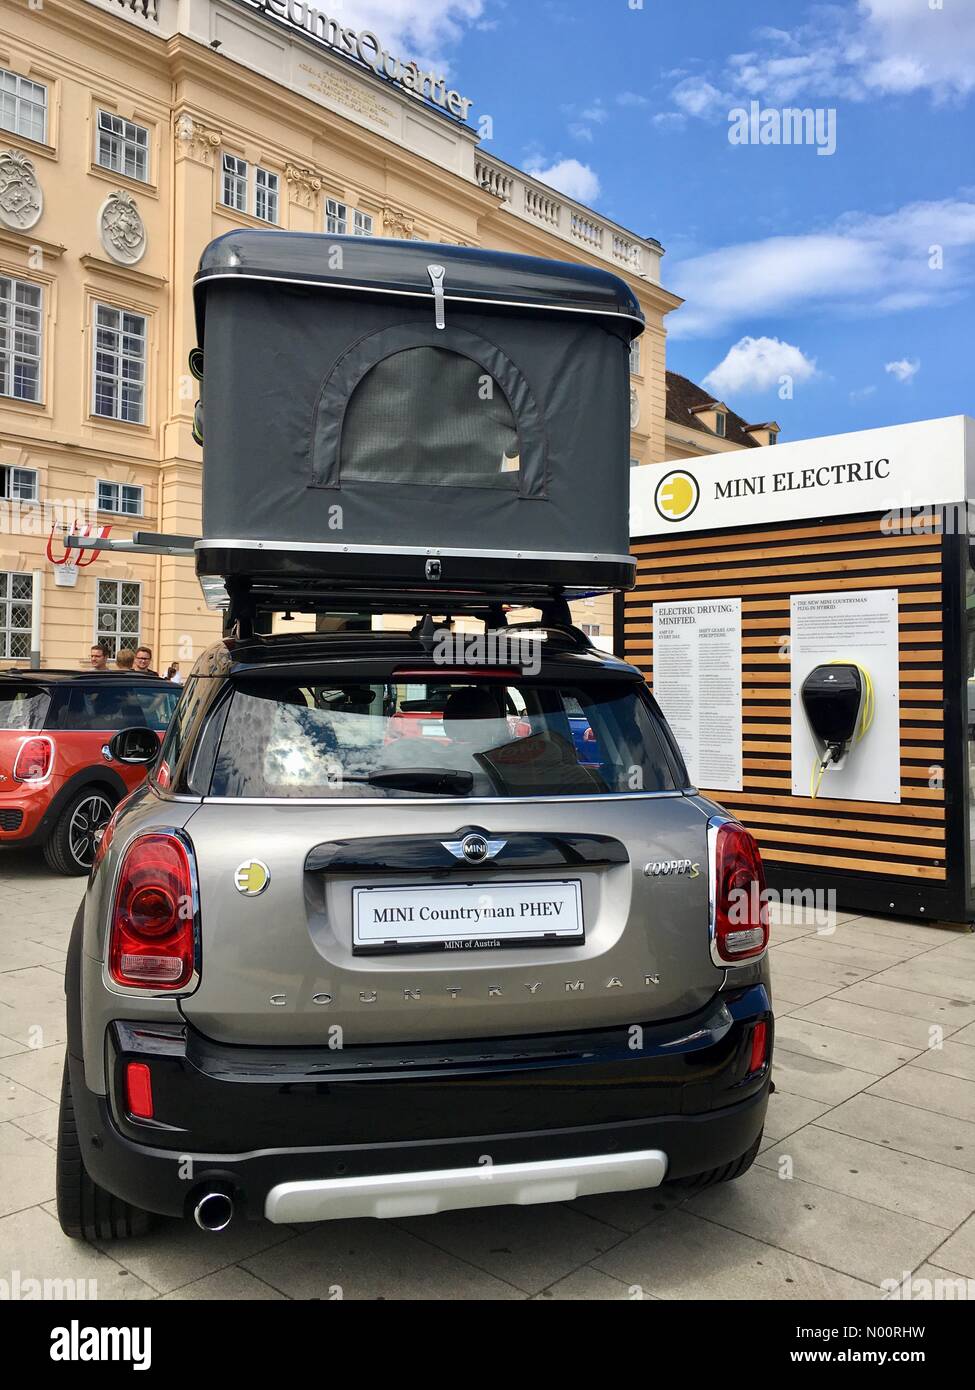 Vienna, Austria. 26th Jun, 2018. Mini SUV PHEV with rooftop tent - Vienna, Austria 26 June 2018 A Mini Cooper Countryman S E ALL4 plug-in hybrid with a camping pop up tent on the roof on display at MuseumsQuartier in Vienna. Credit: Lisa Werner/StockimoNews/Alamy Live News Stock Photo